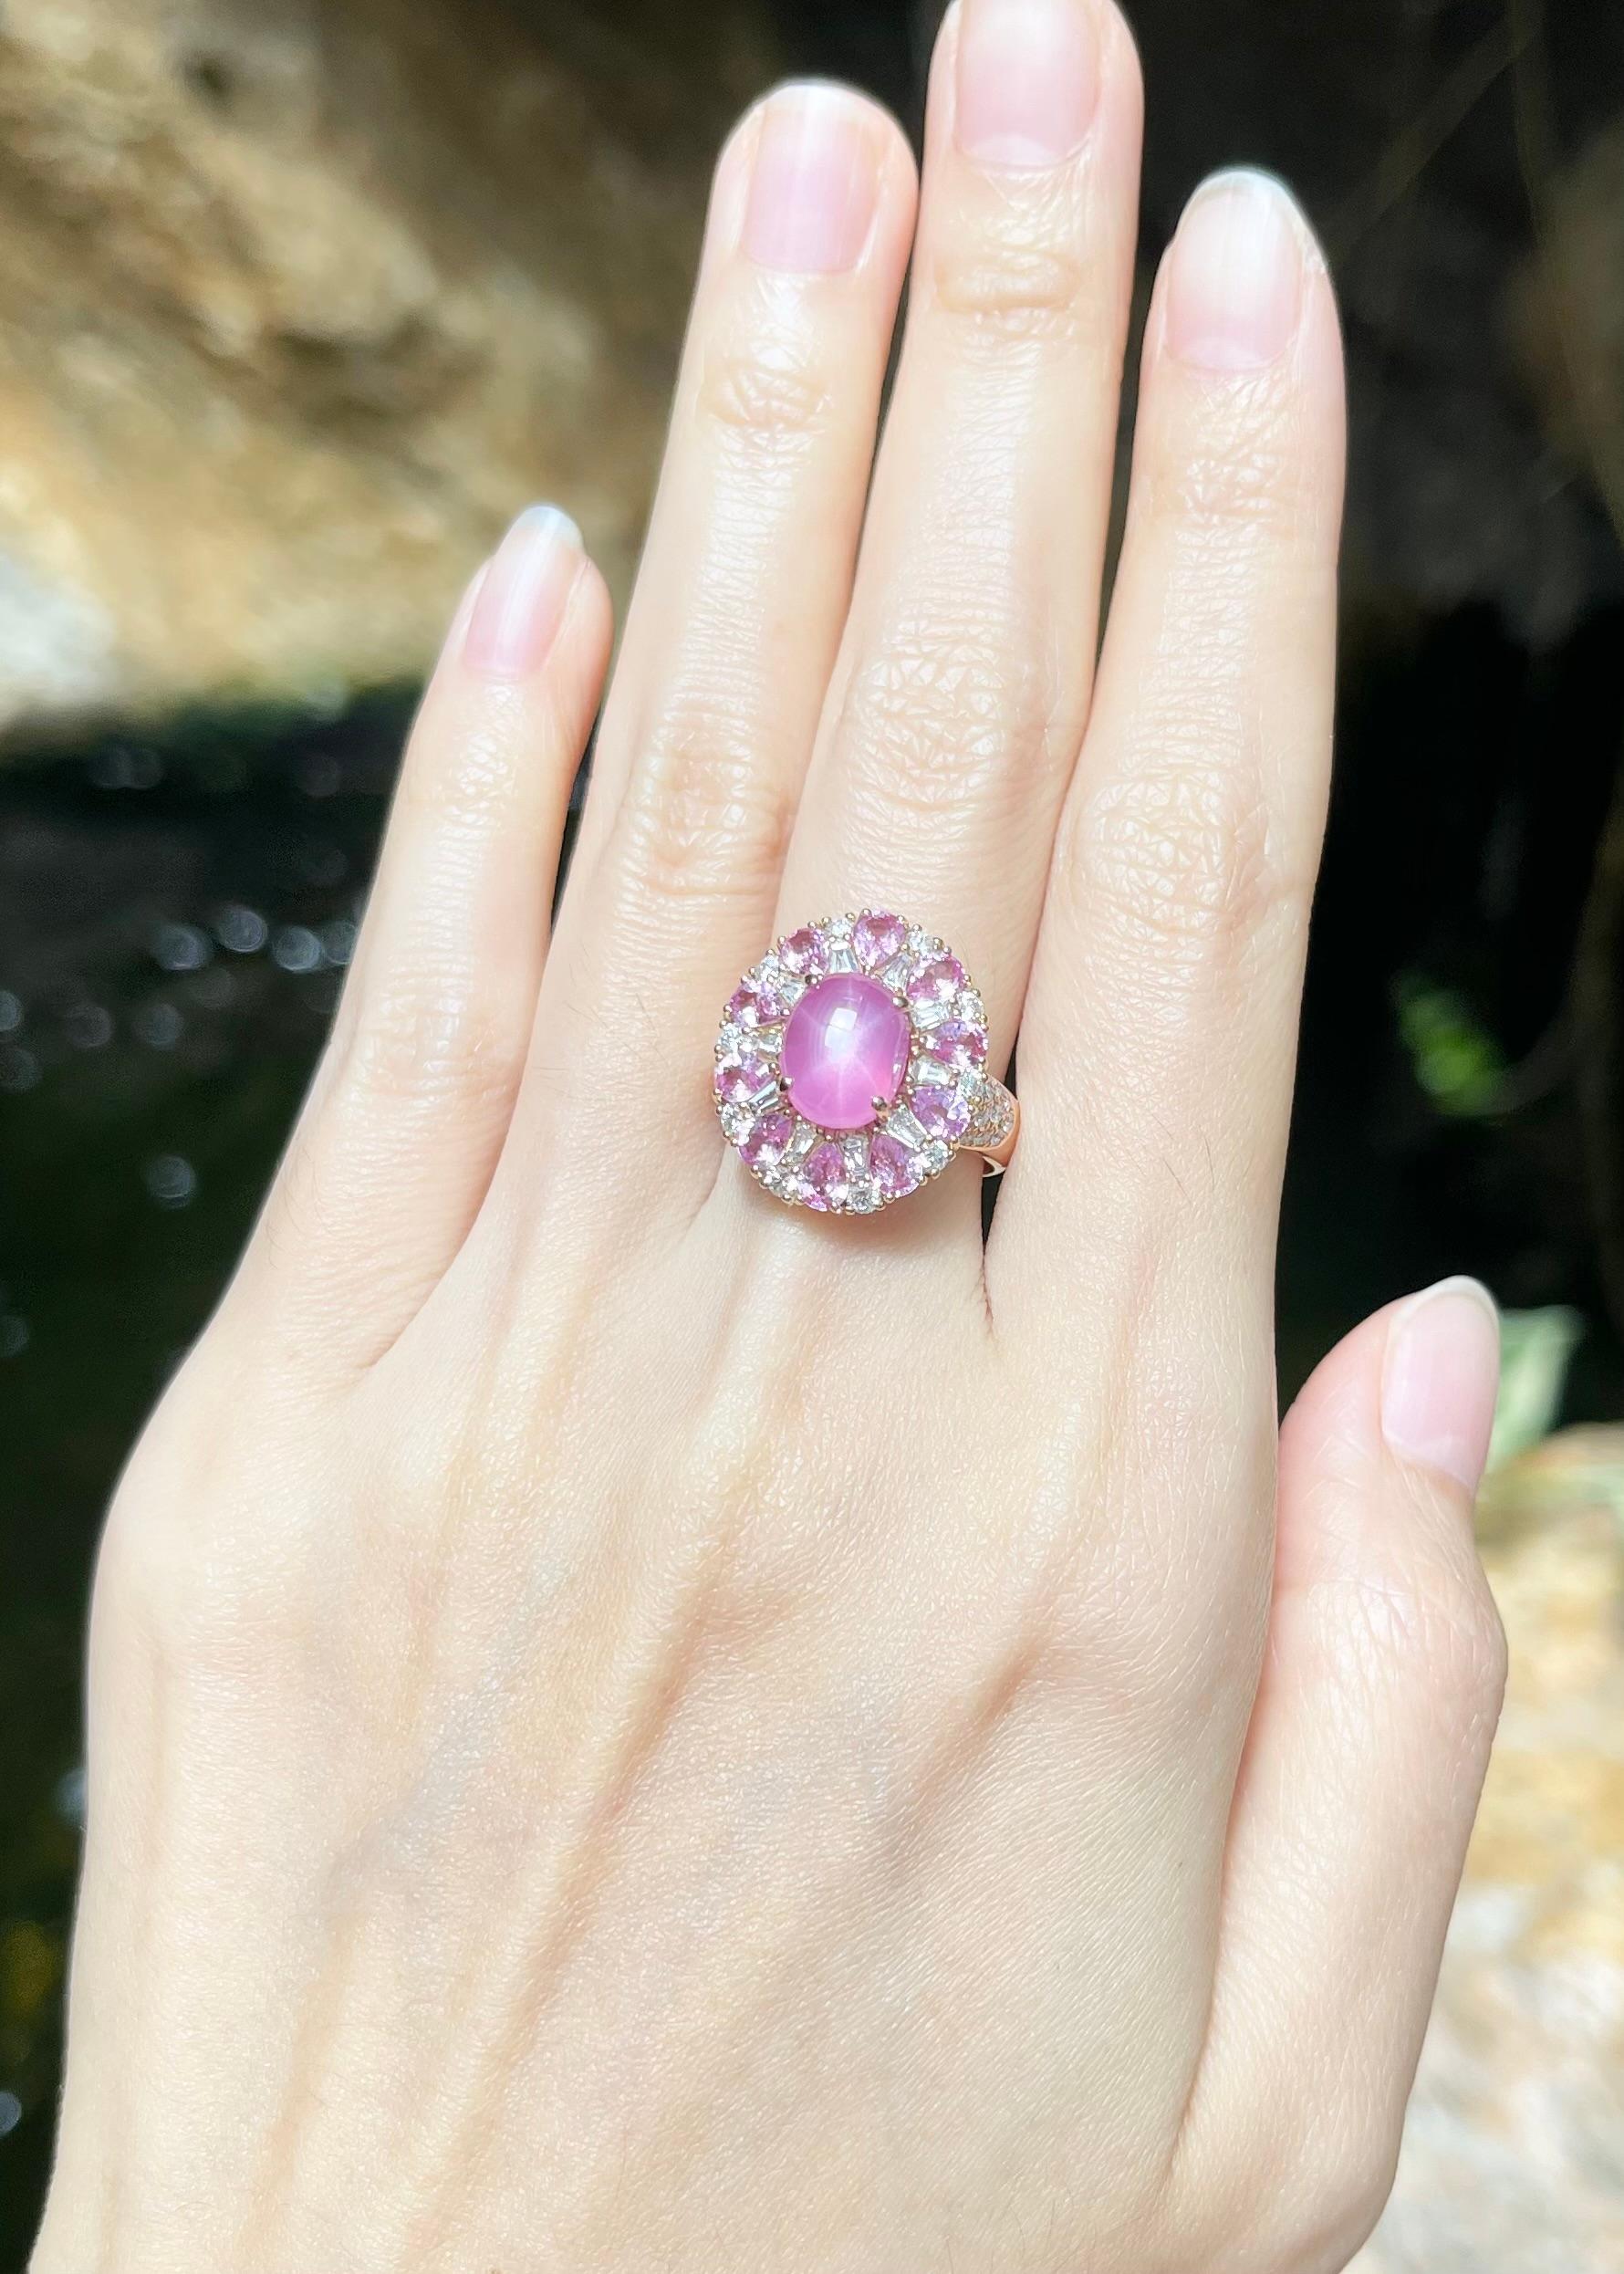 Star Ruby 4.80 carats, Pink Sapphire 1.75 carats and Diamond 0.83 carat Ring set in 18K Rose Gold Settings

Width:  1.5 cm 
Length: 1.8 cm
Ring Size: 54
Total Weight: 8.46 grams

Star Ruby
Width:  0.7 cm 
Length: 0.9 cm

